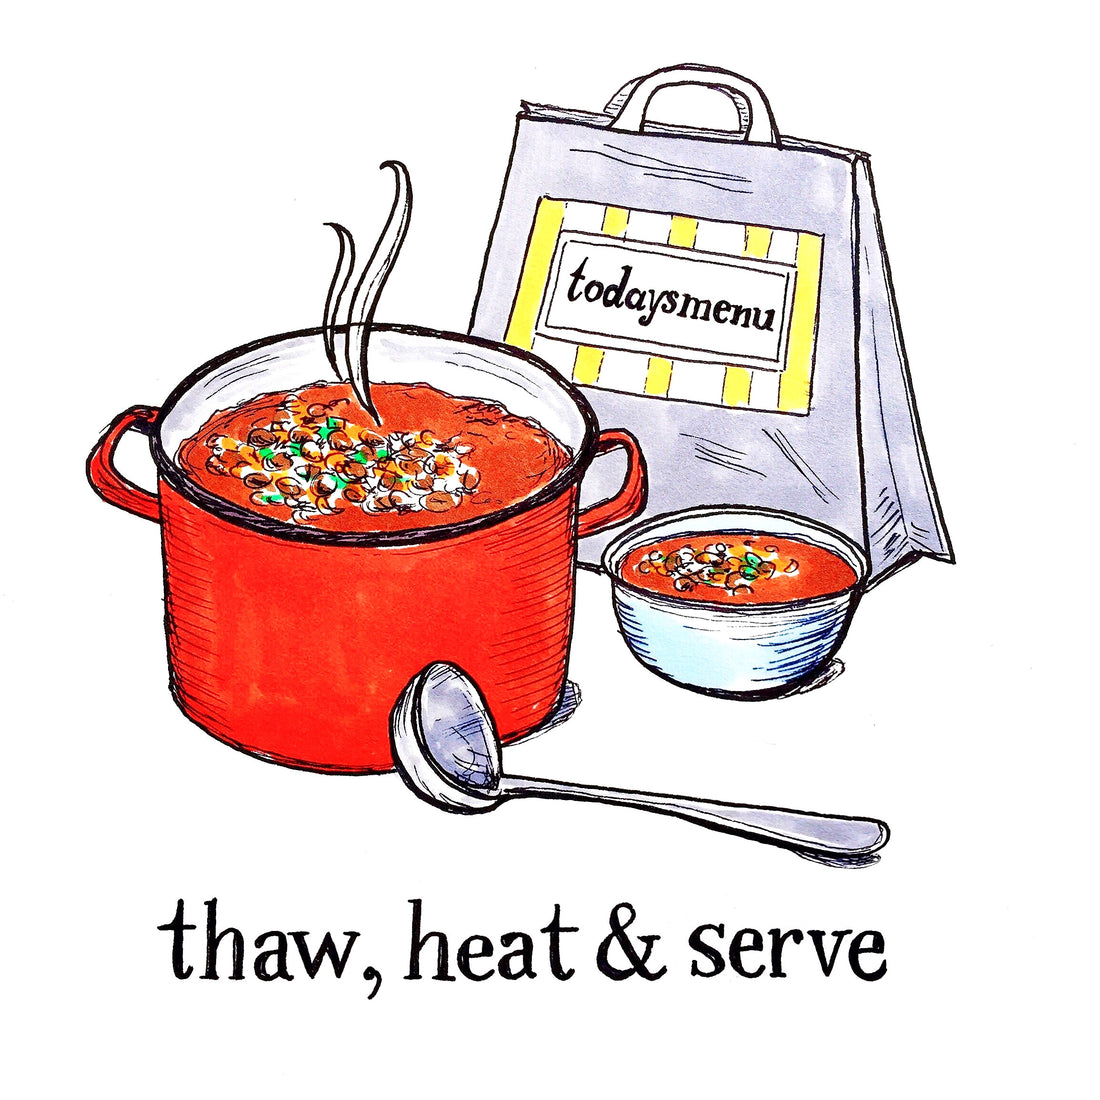 Thaw, heat and serve meals